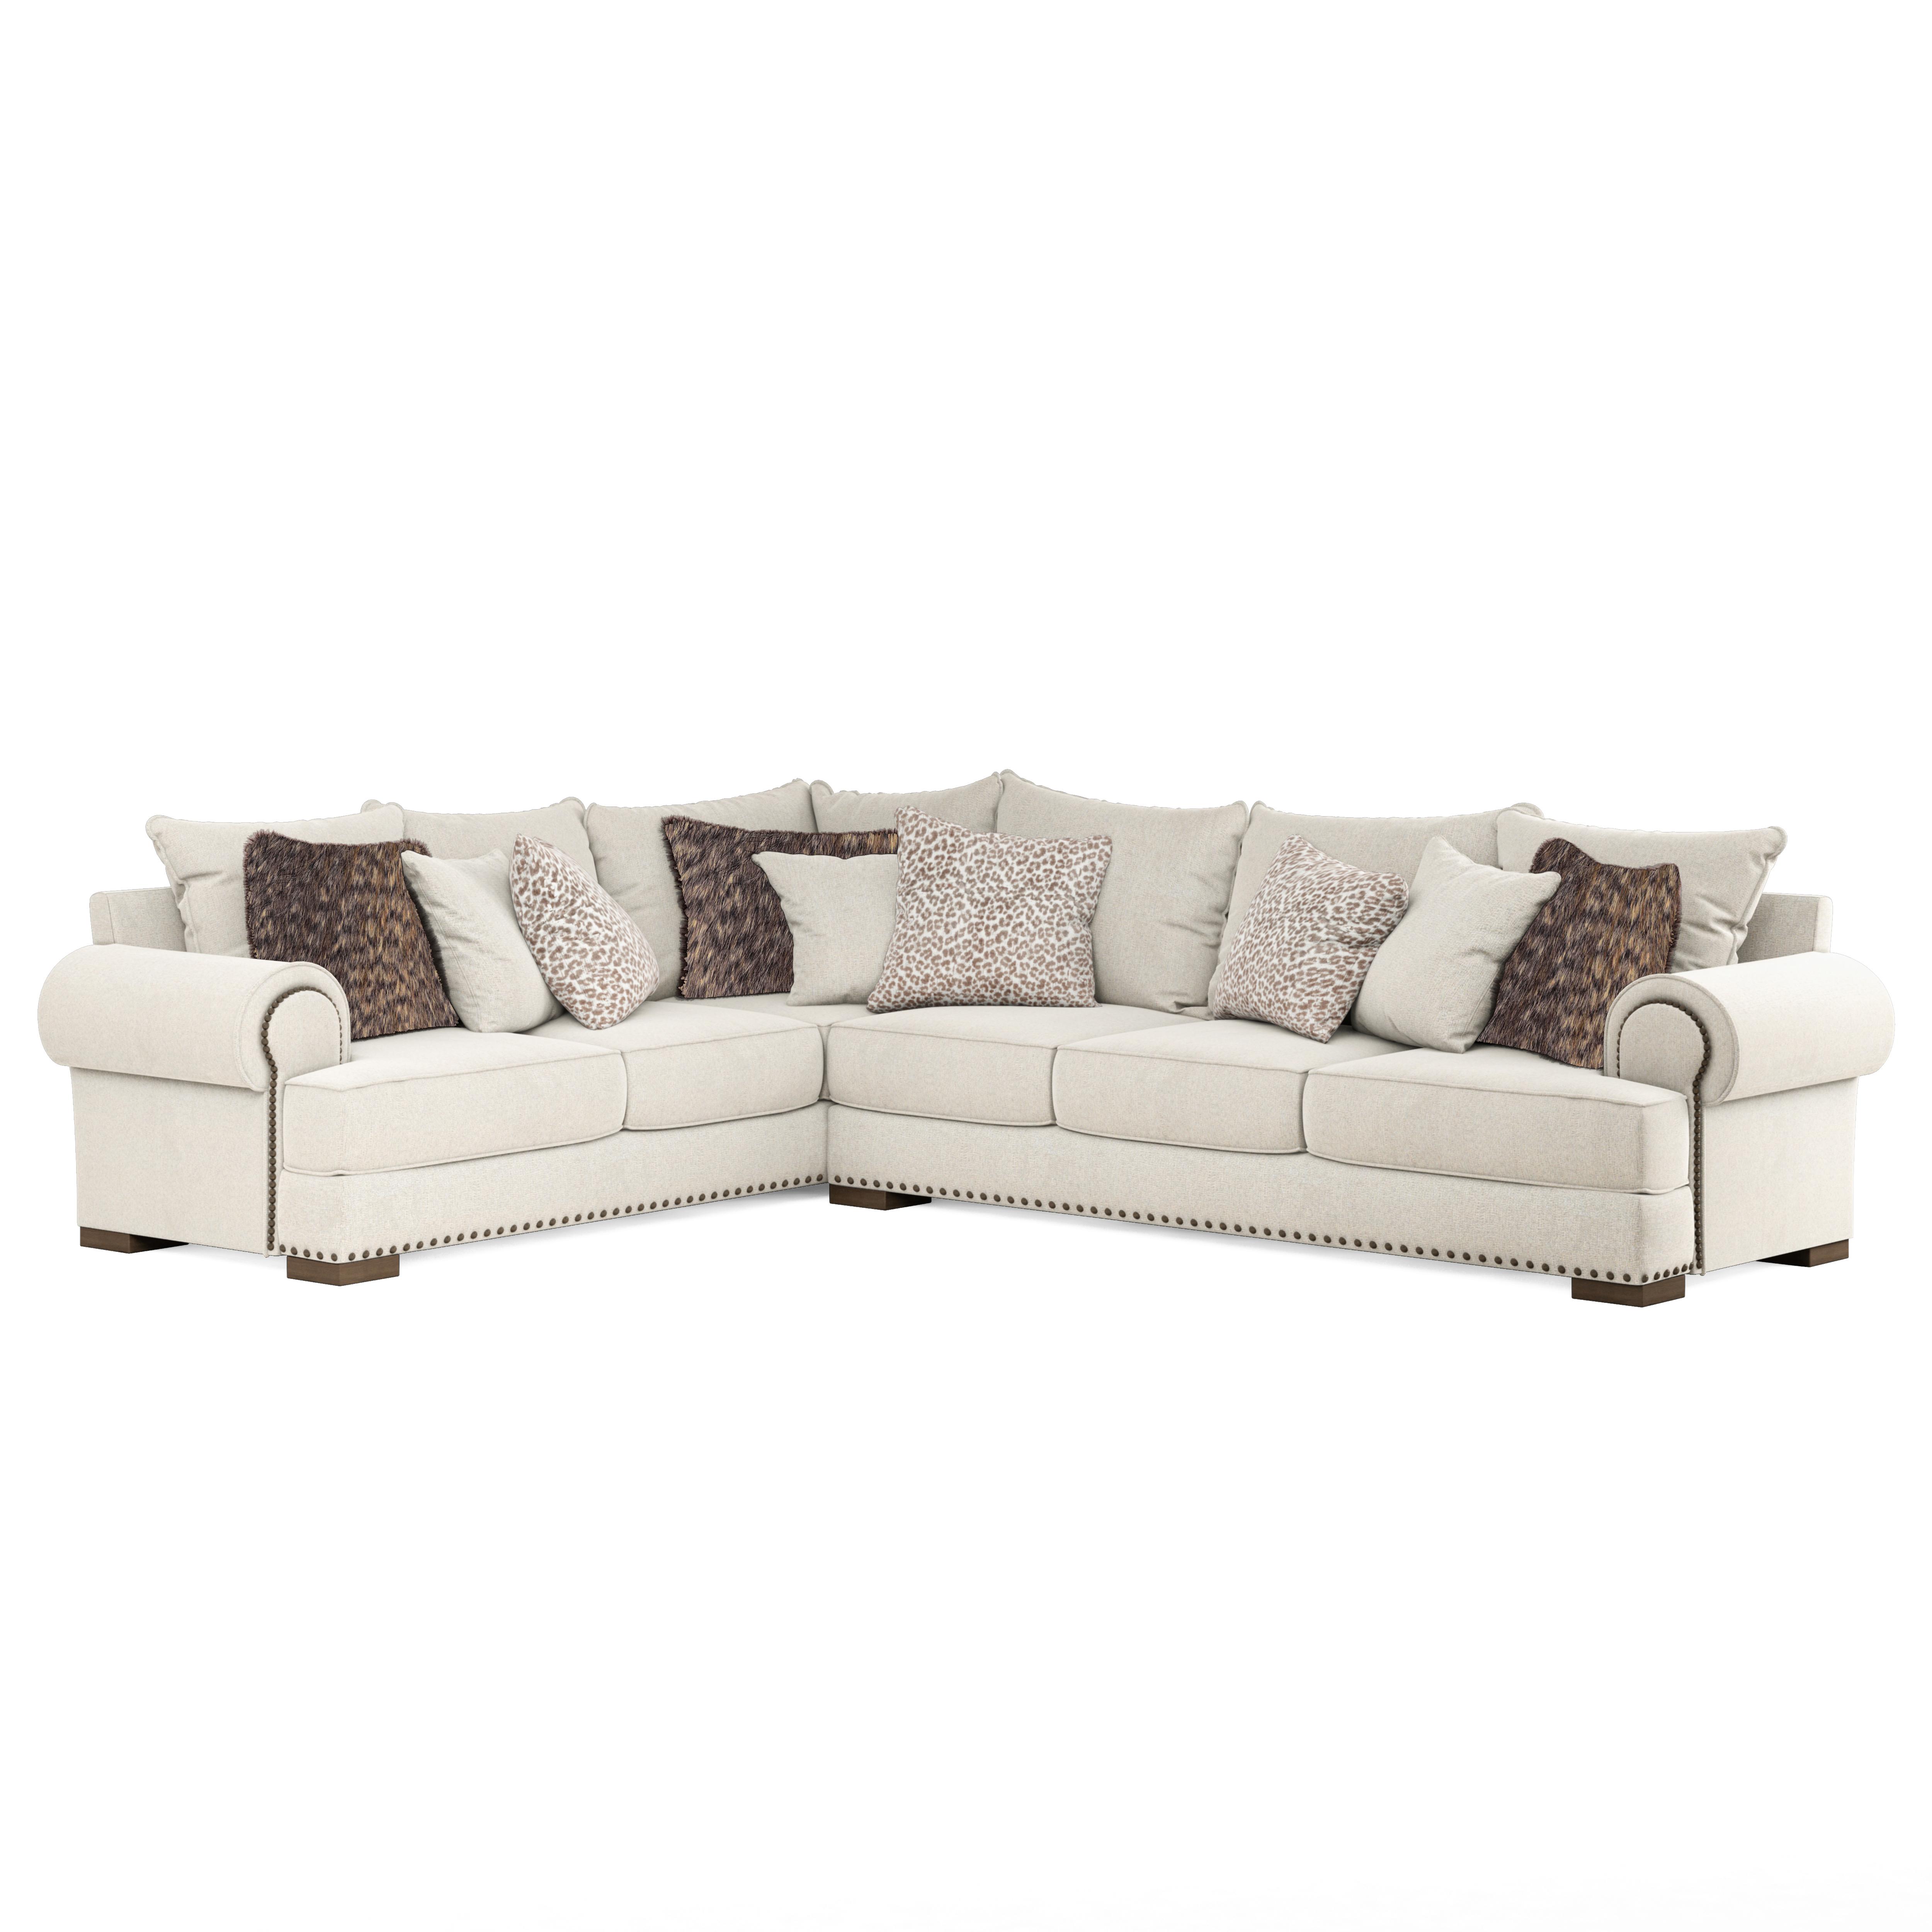 Modern, Traditional Sectional Sofa Scully Berens 780529-5012C7S2 in Brown, Beige Fabric